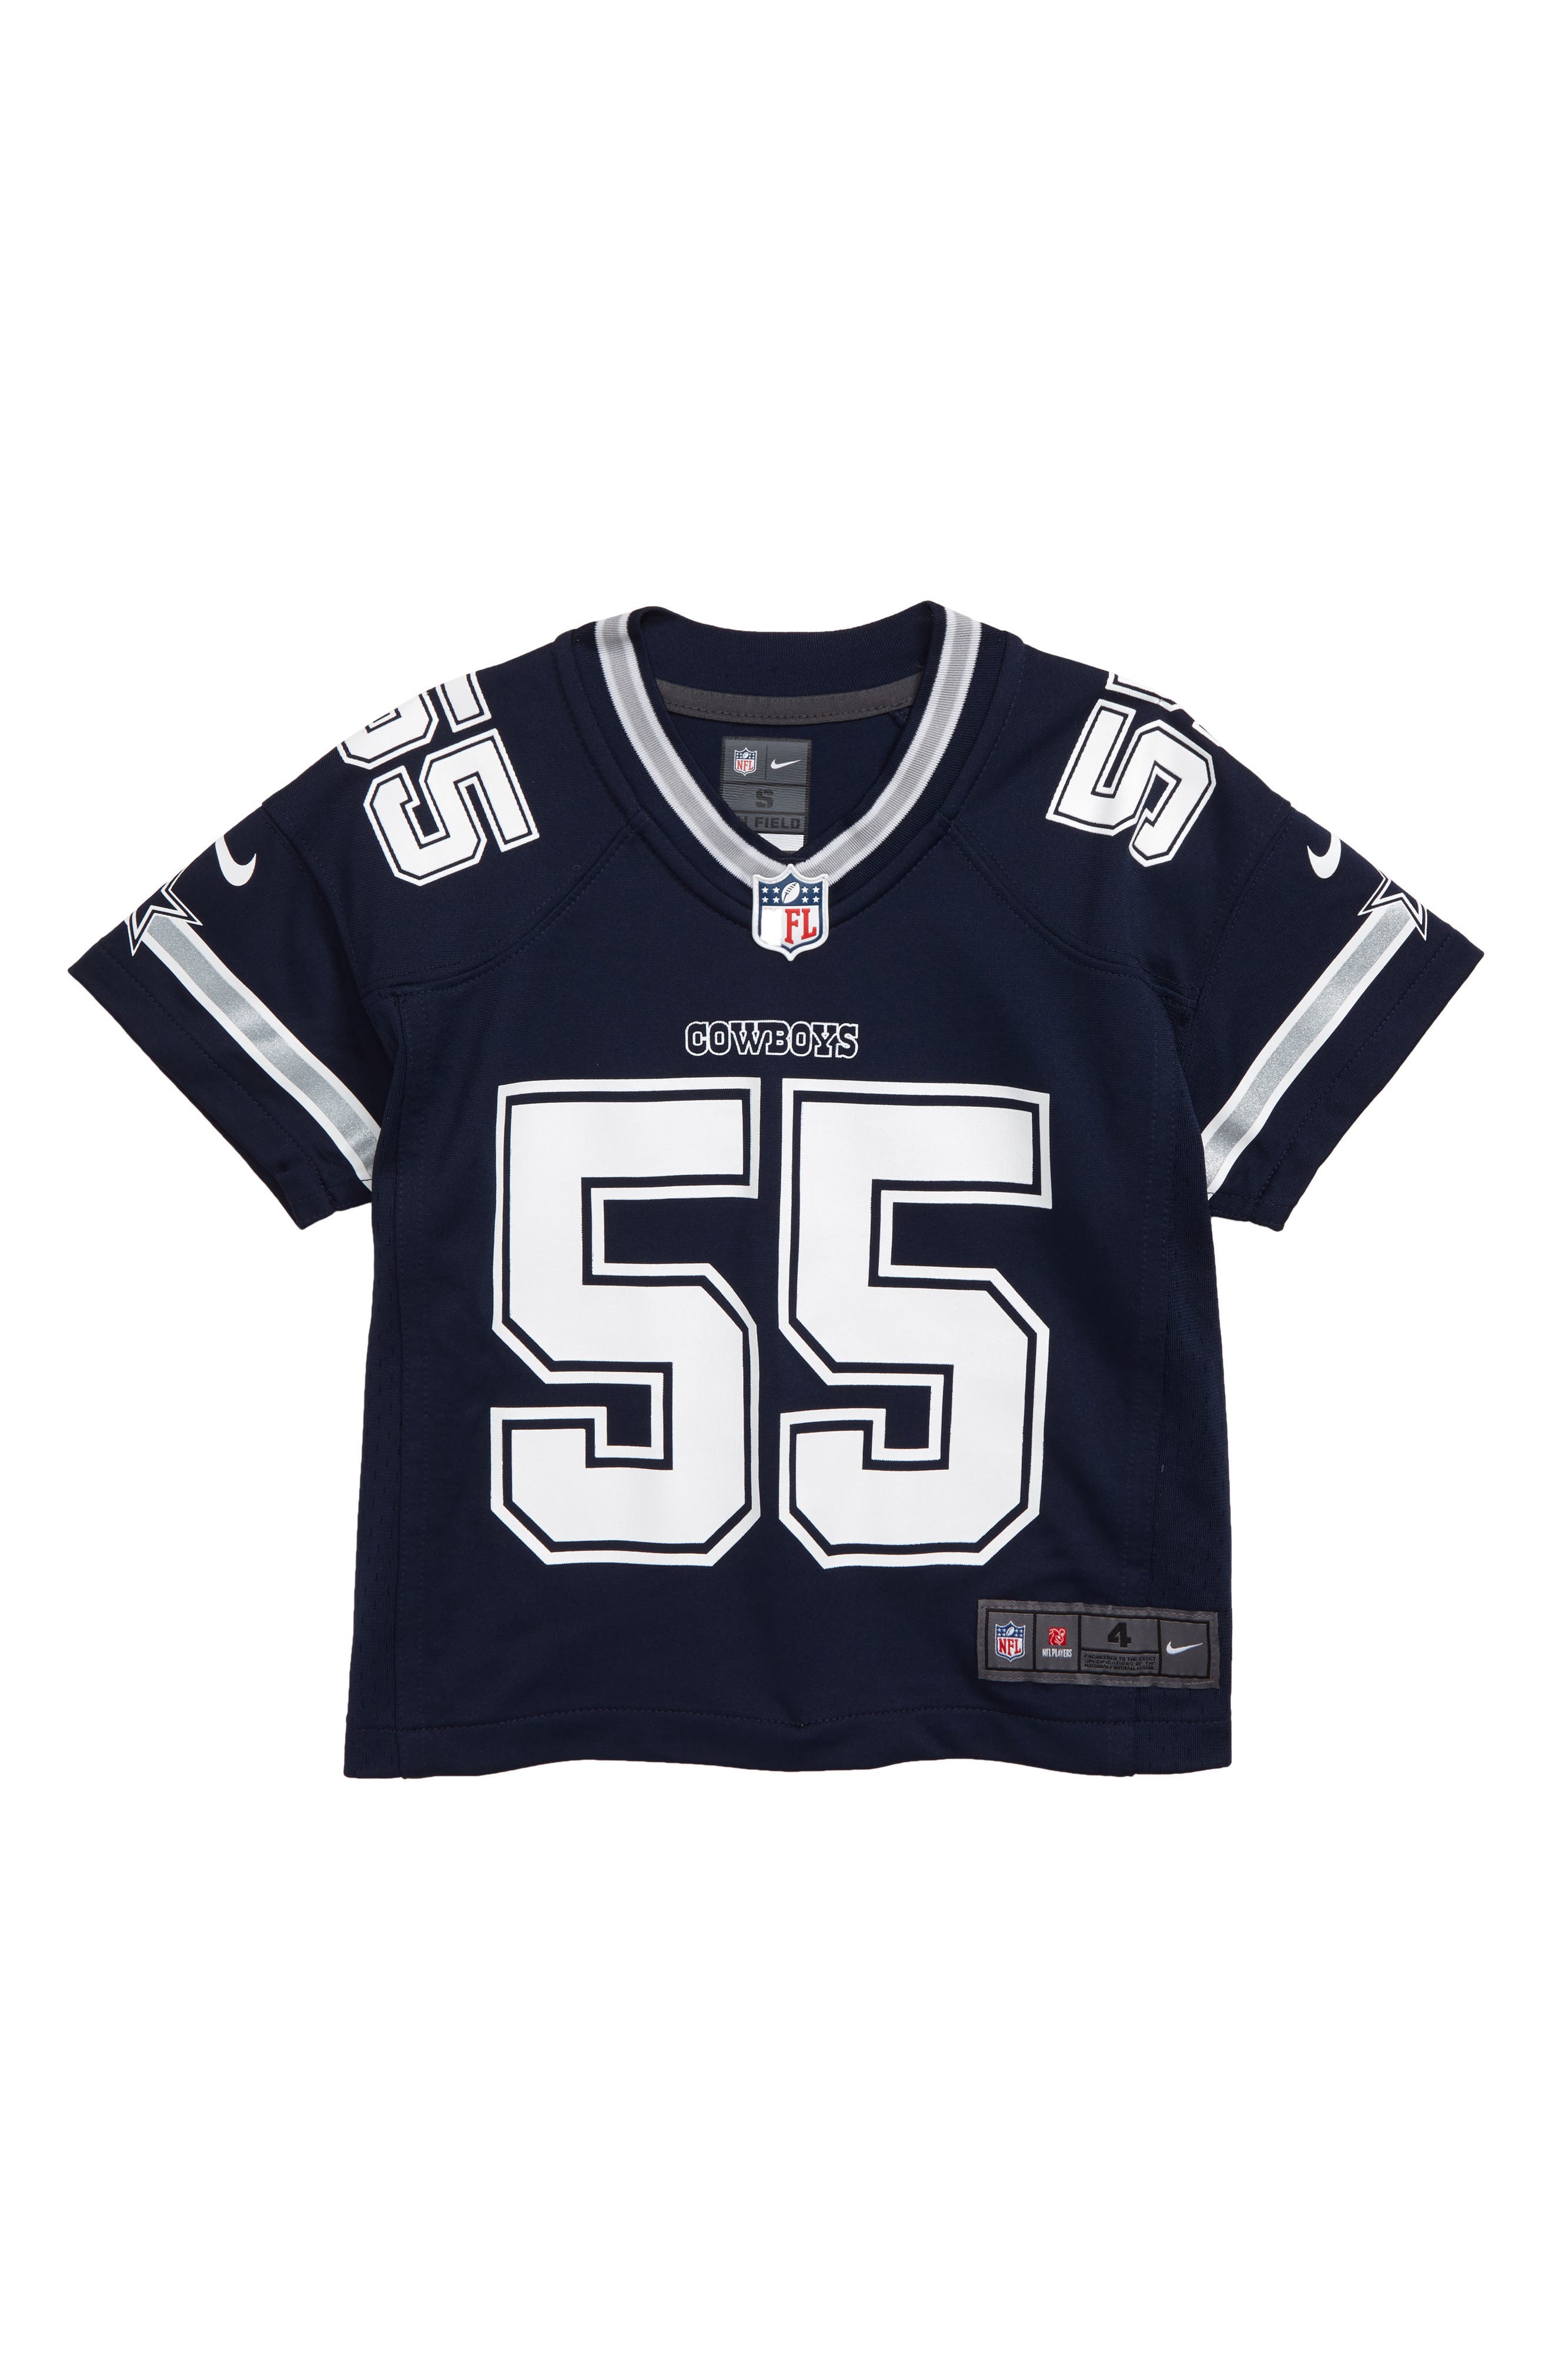 nfl dallas cowboys toddler jersey